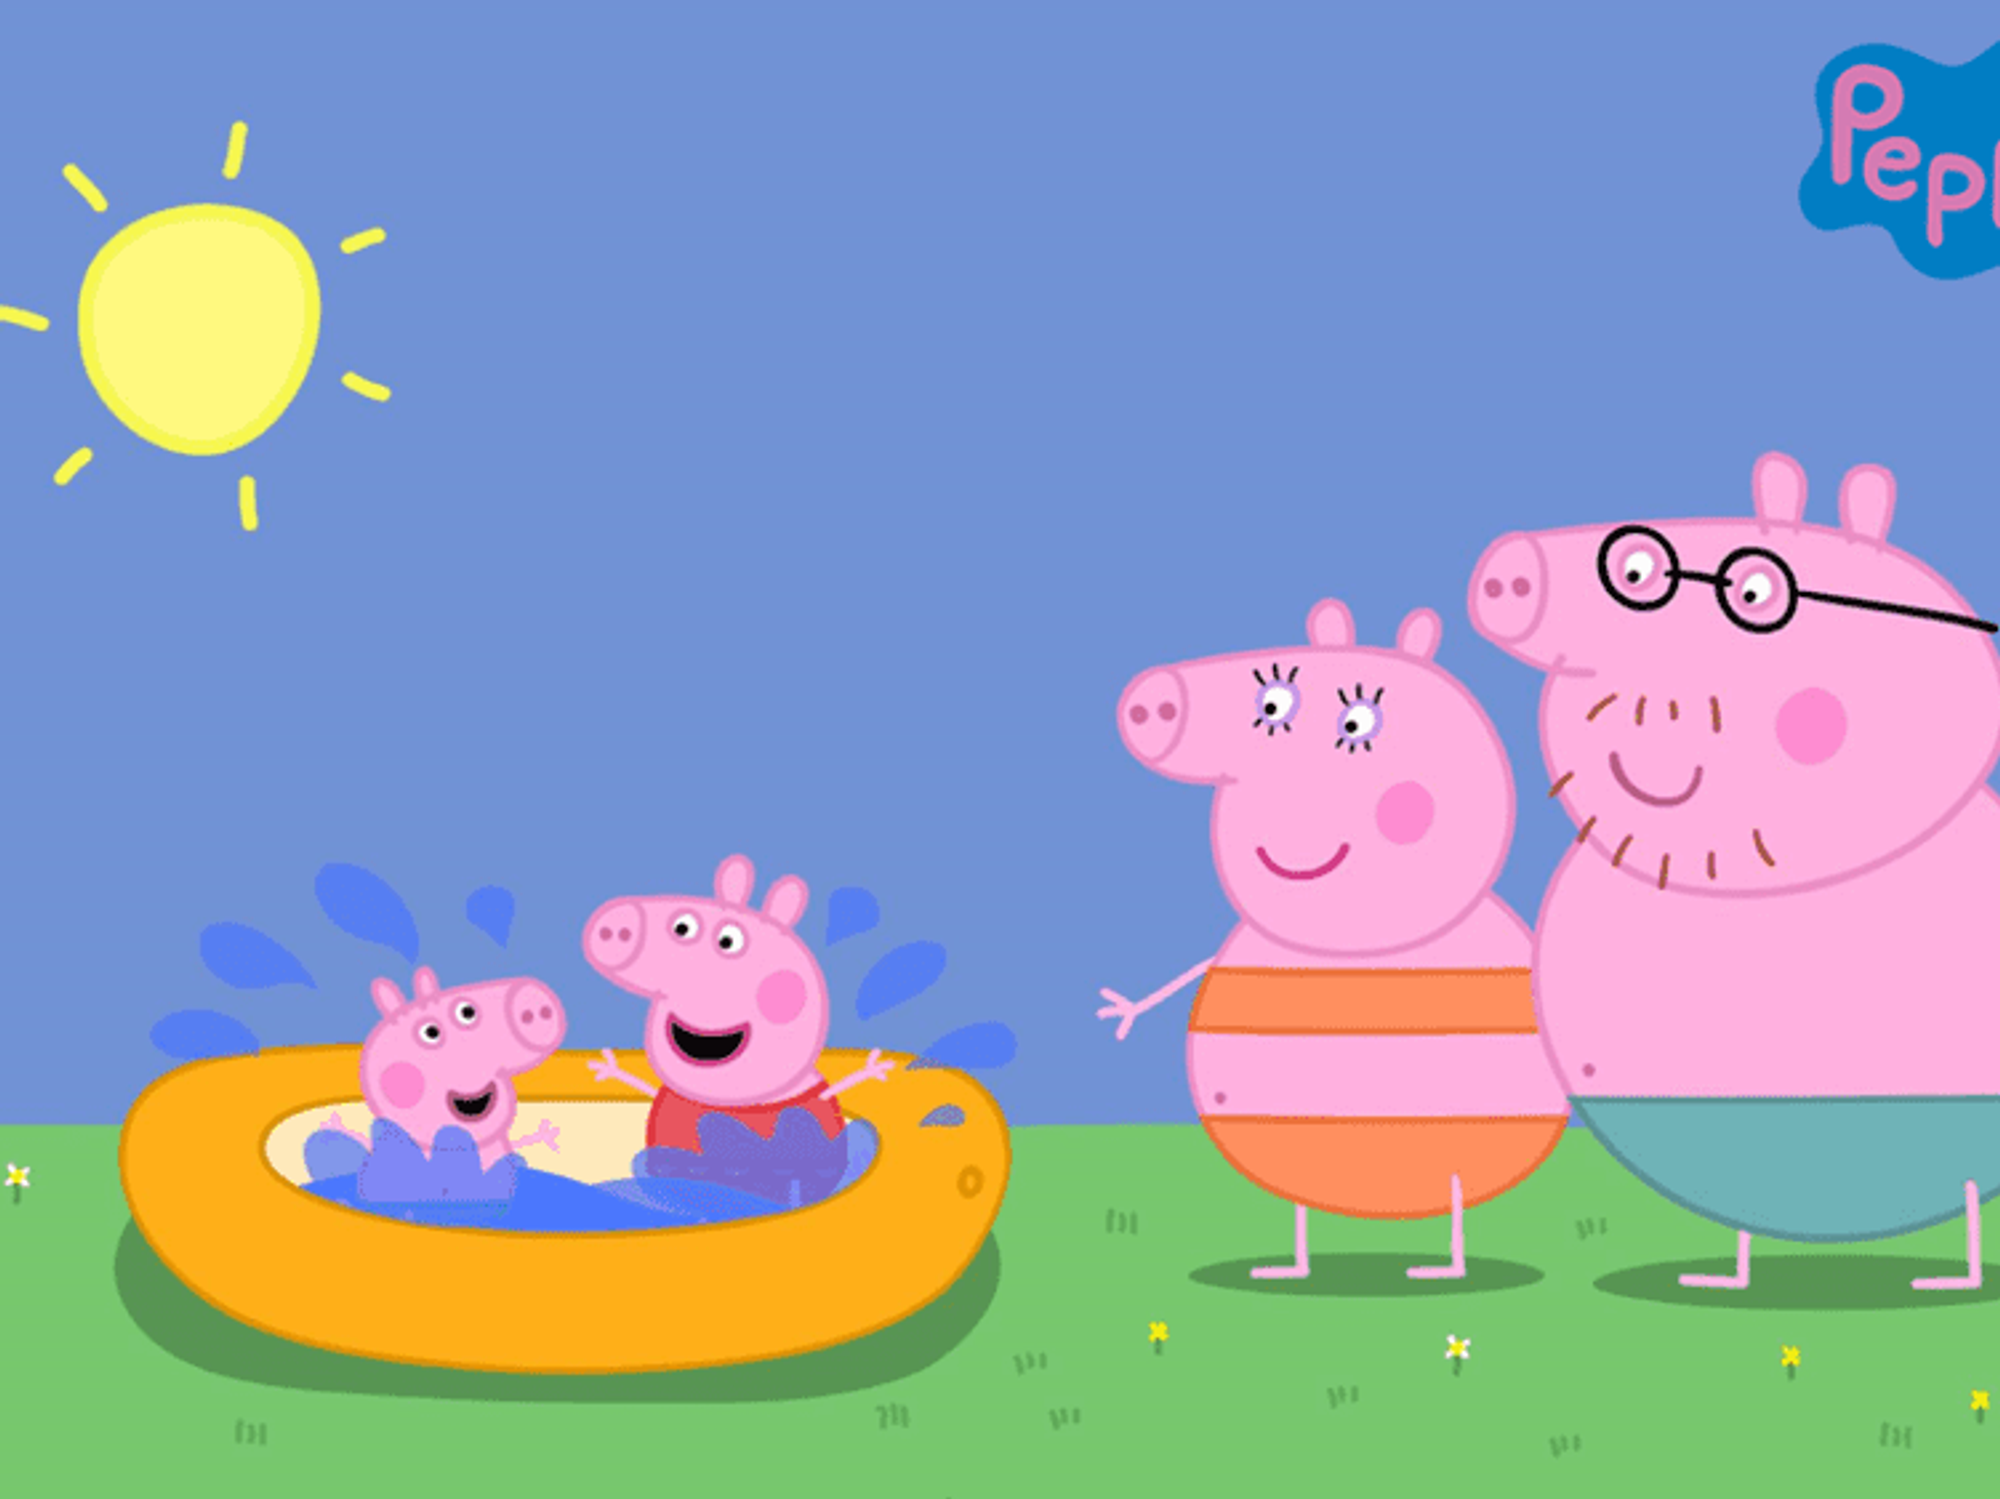 Peppa Pig resumes playdates for kids in Grapevine after coronavirus  time-out - CultureMap Fort Worth